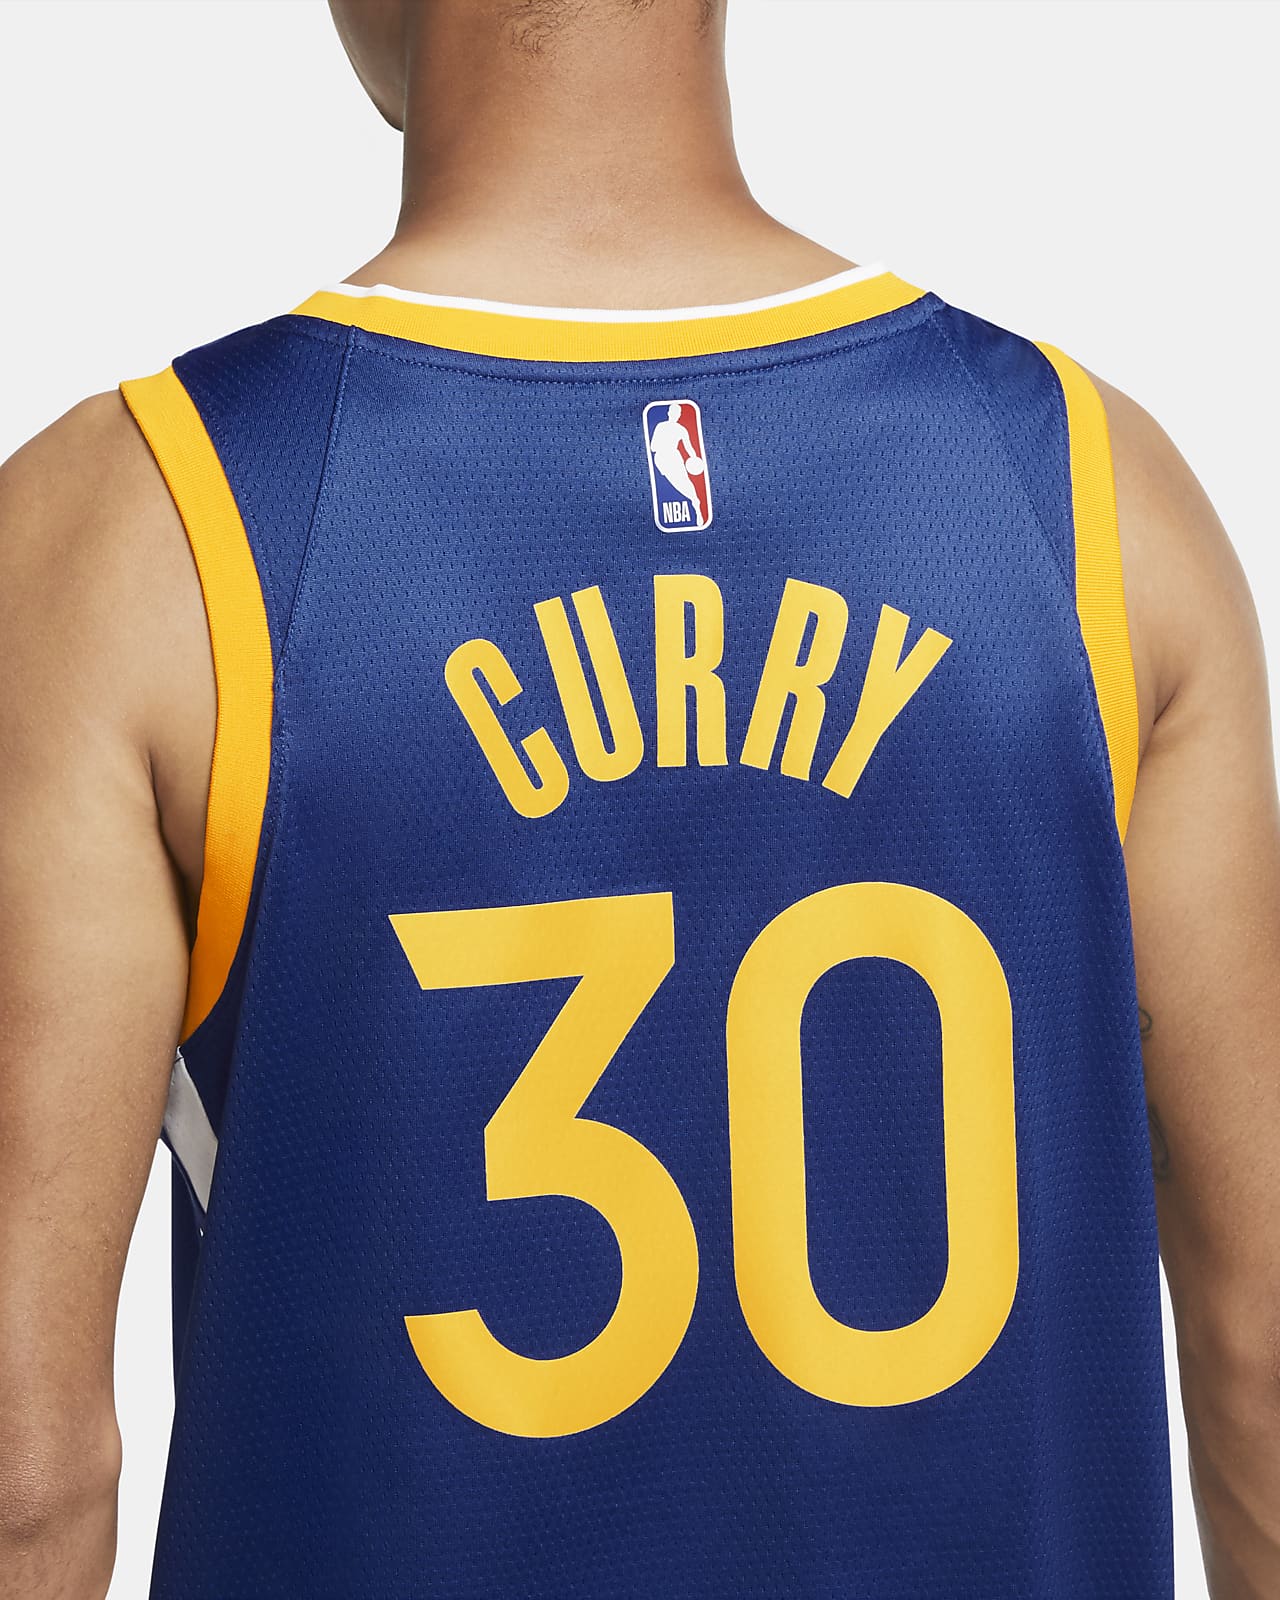 Steph Curry Jersey Style T-Shirt Kids Curry Yellow T-Shirt Gift Set Youth Sizes Premium Quality Gift Basketball Curry Arm Sleeve